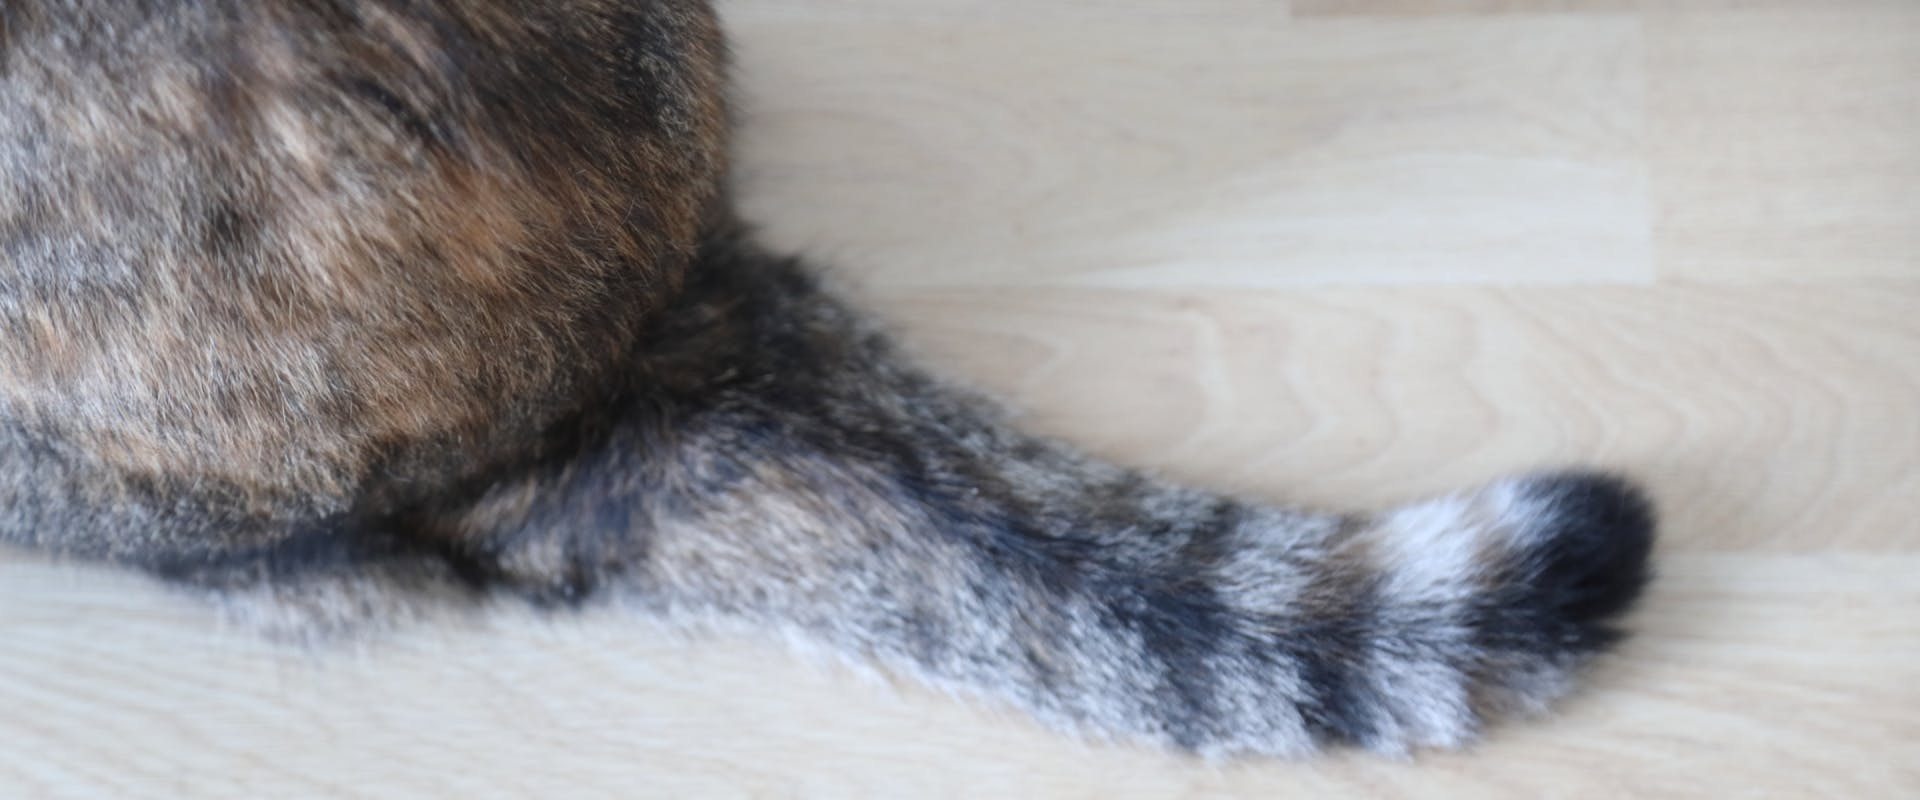 a stripy and short cat's tail in focus whilst a cat sits on a wooden floor